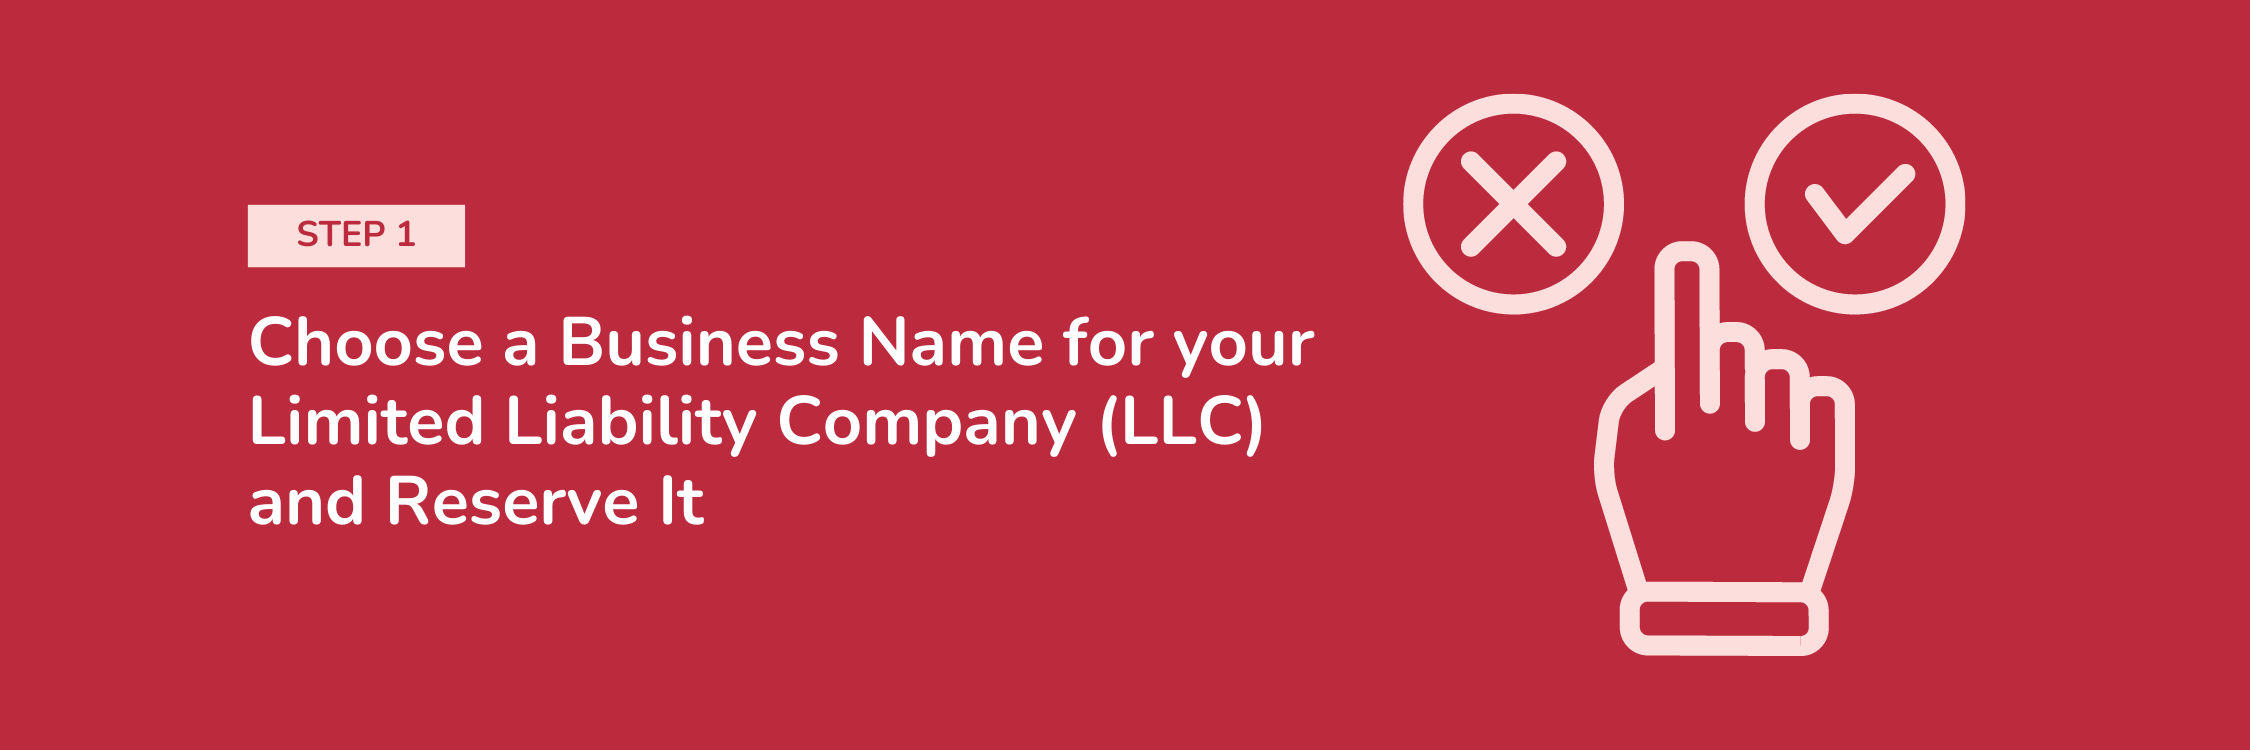 Step 1: Choose a Business Name for Your Limited Liability Company (LLC) and Reserve It